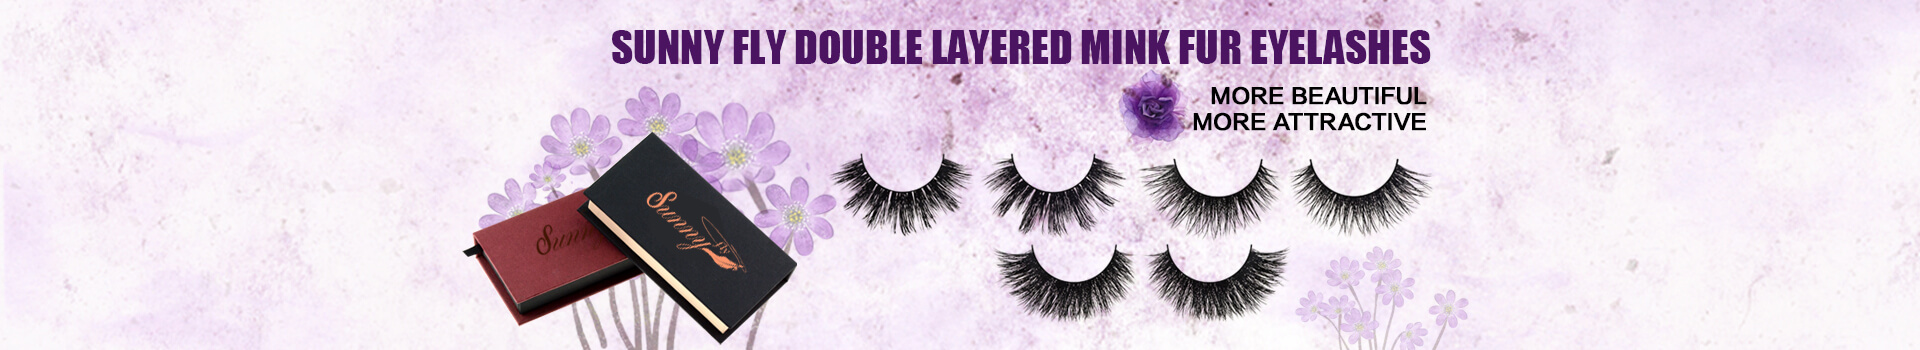 Double Layered Nerz Pelz Wimpern MD10